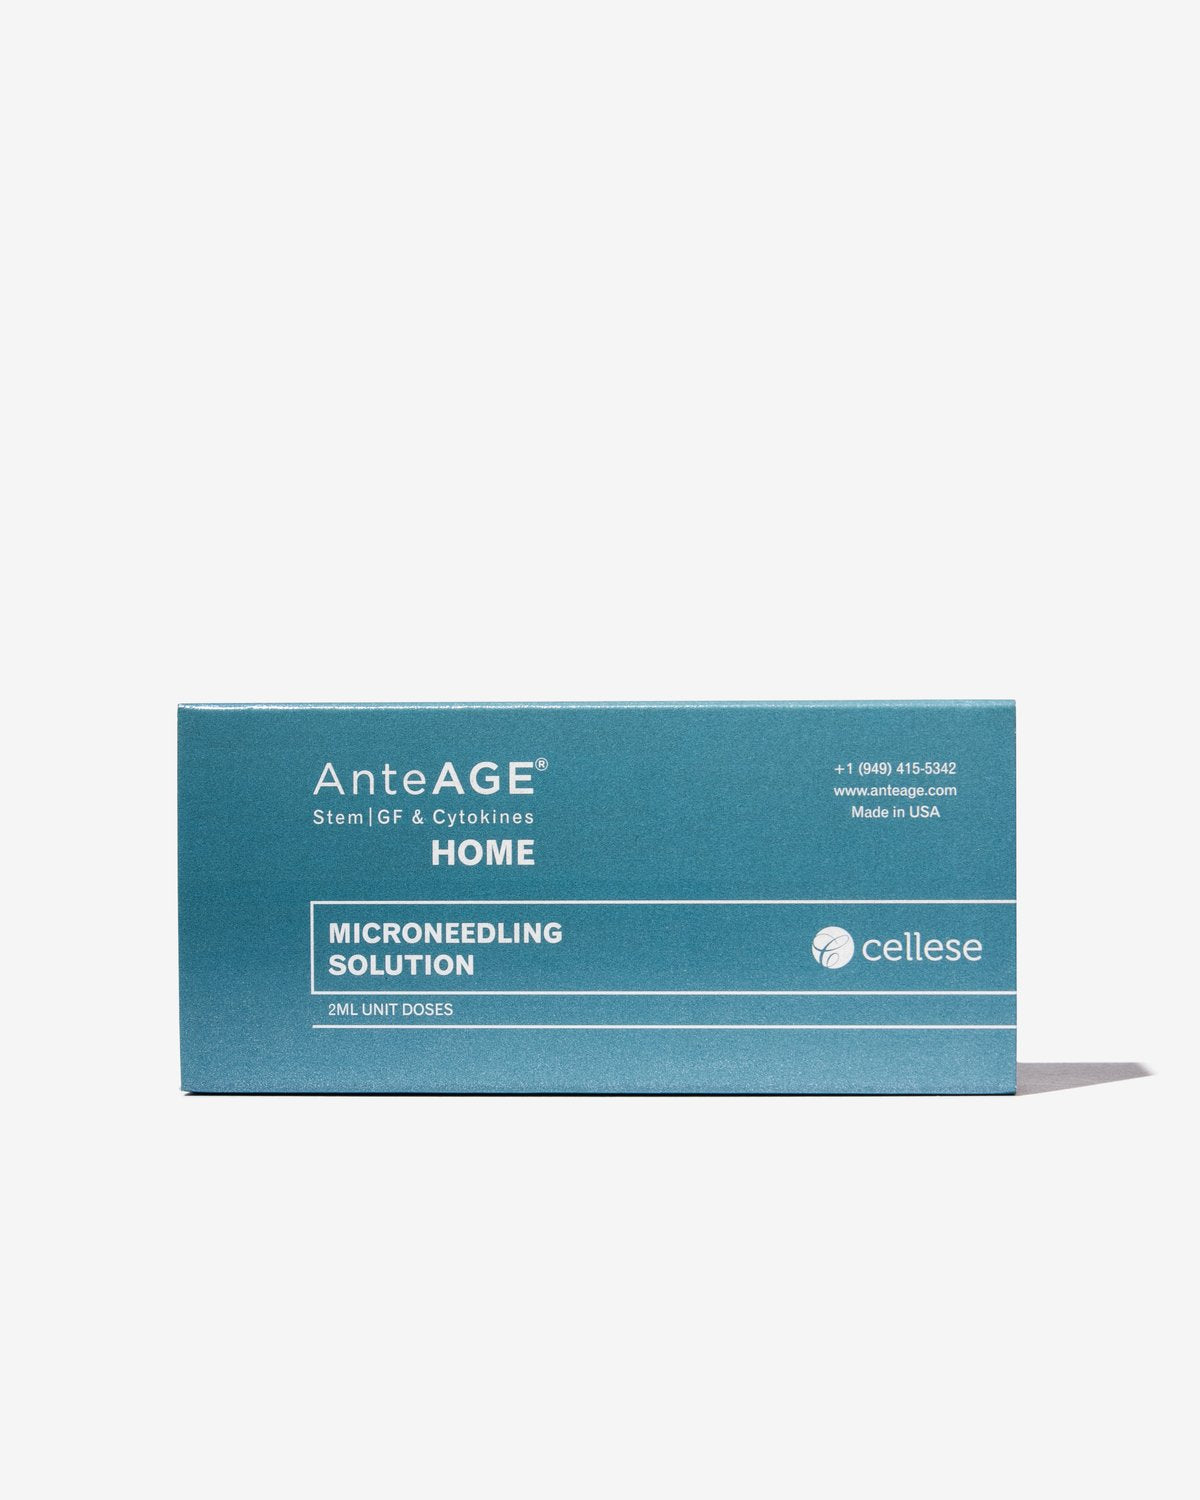 AnteAGE® Home Microneedling Solution - Click to Buy!